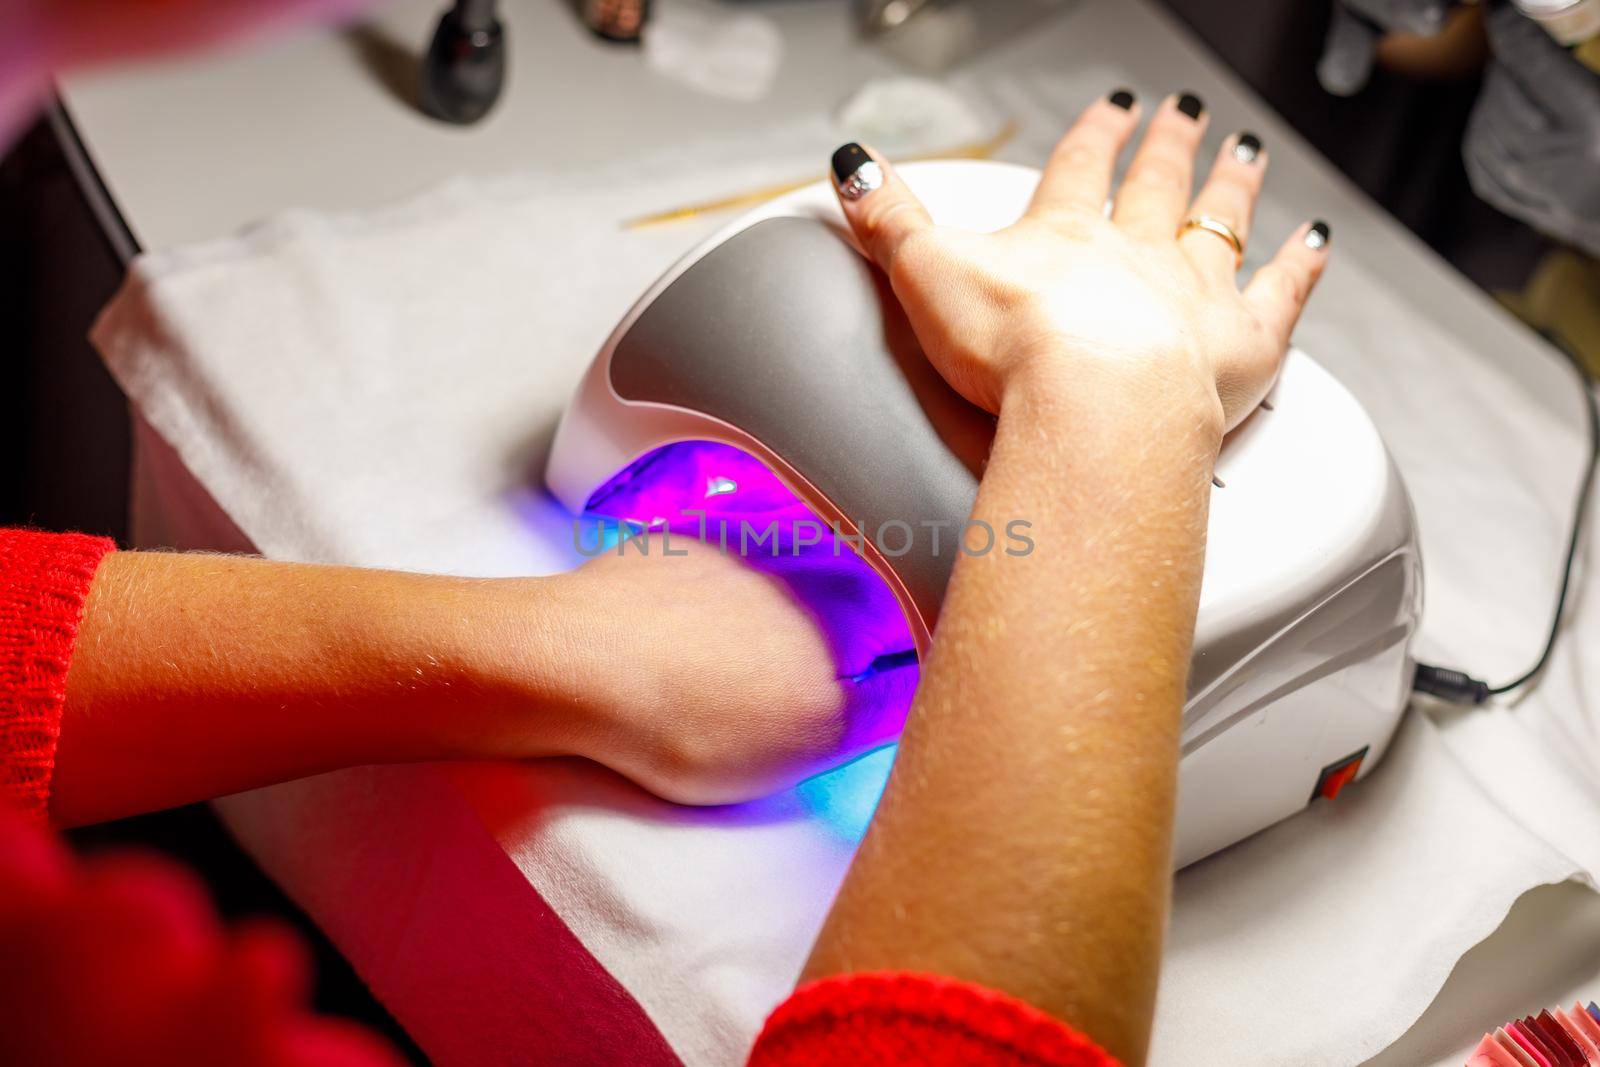 Woman's hand in a lamp for manicure. Dries nails after polishing. by Yurich32